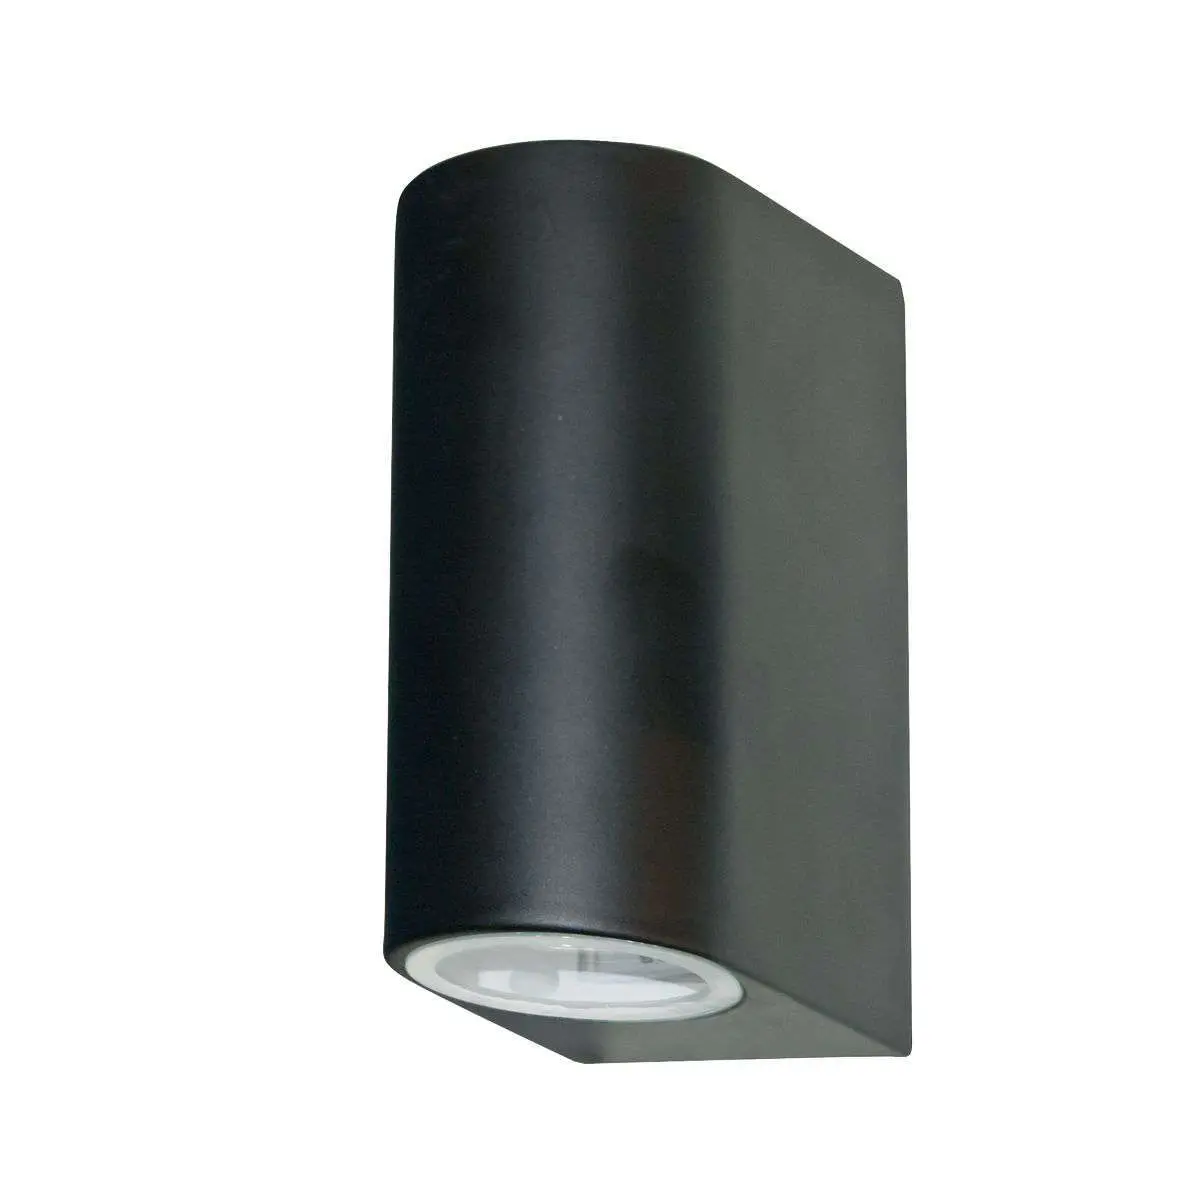 2 Light Black Outdoor Up & Down Light with Fixed Glass Lens